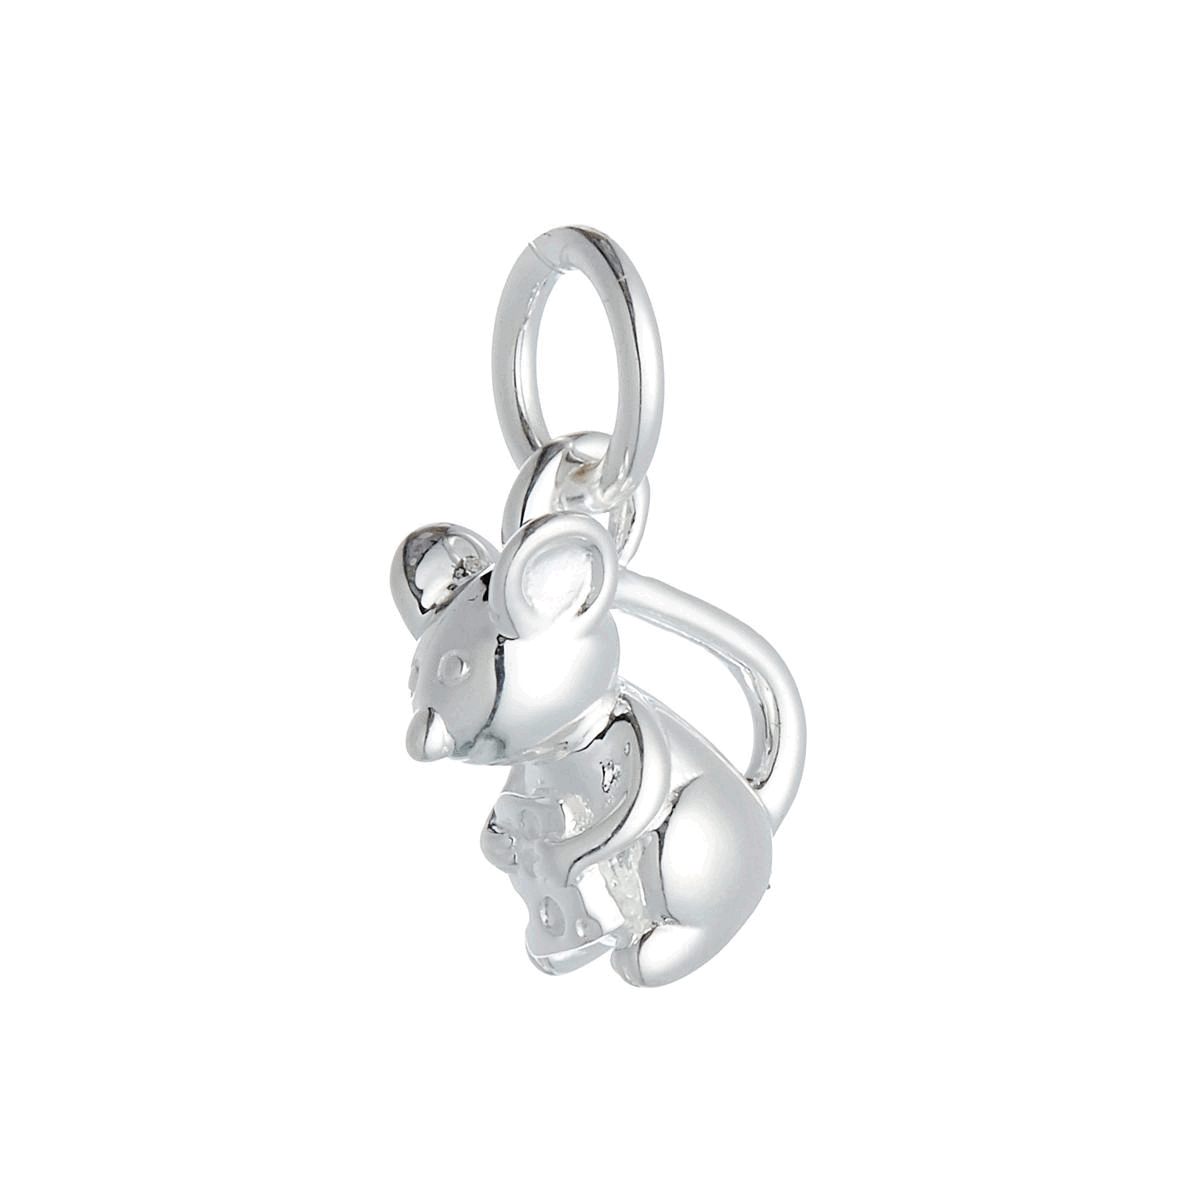 solid silver mouse with cheese charm for necklace or bracelet